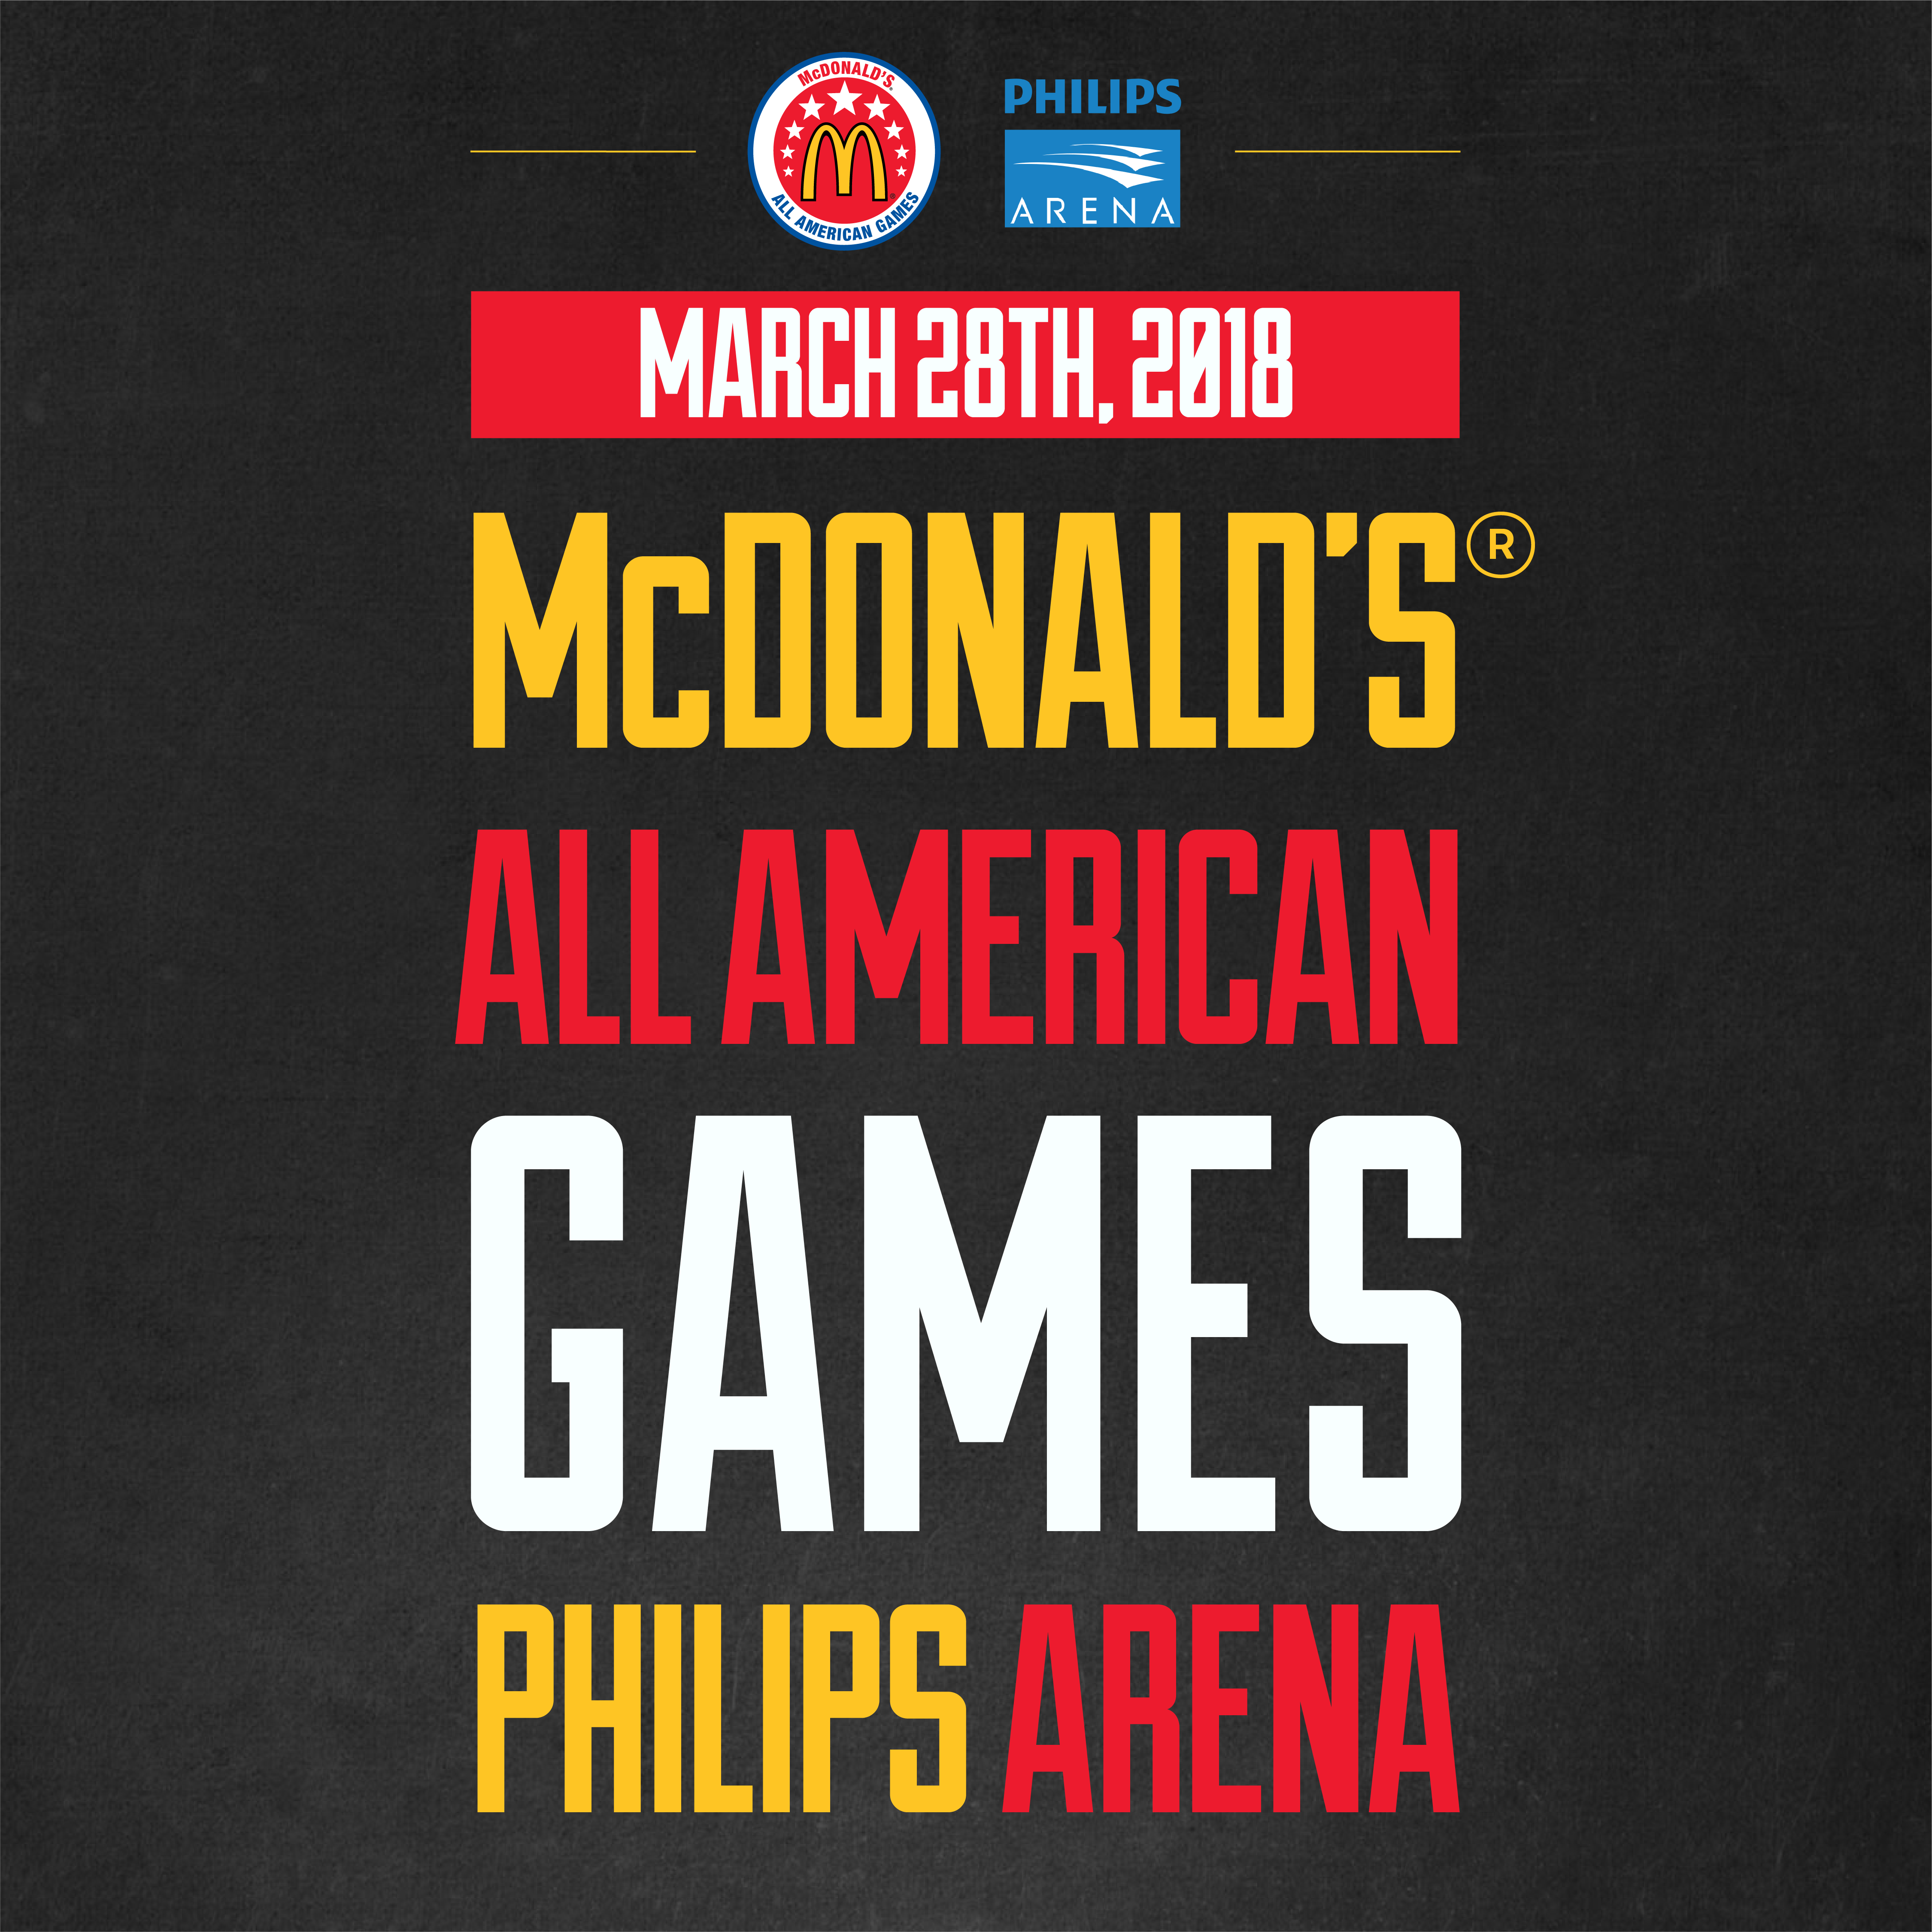 10 Interesting Facts About The McDonald's All American Game